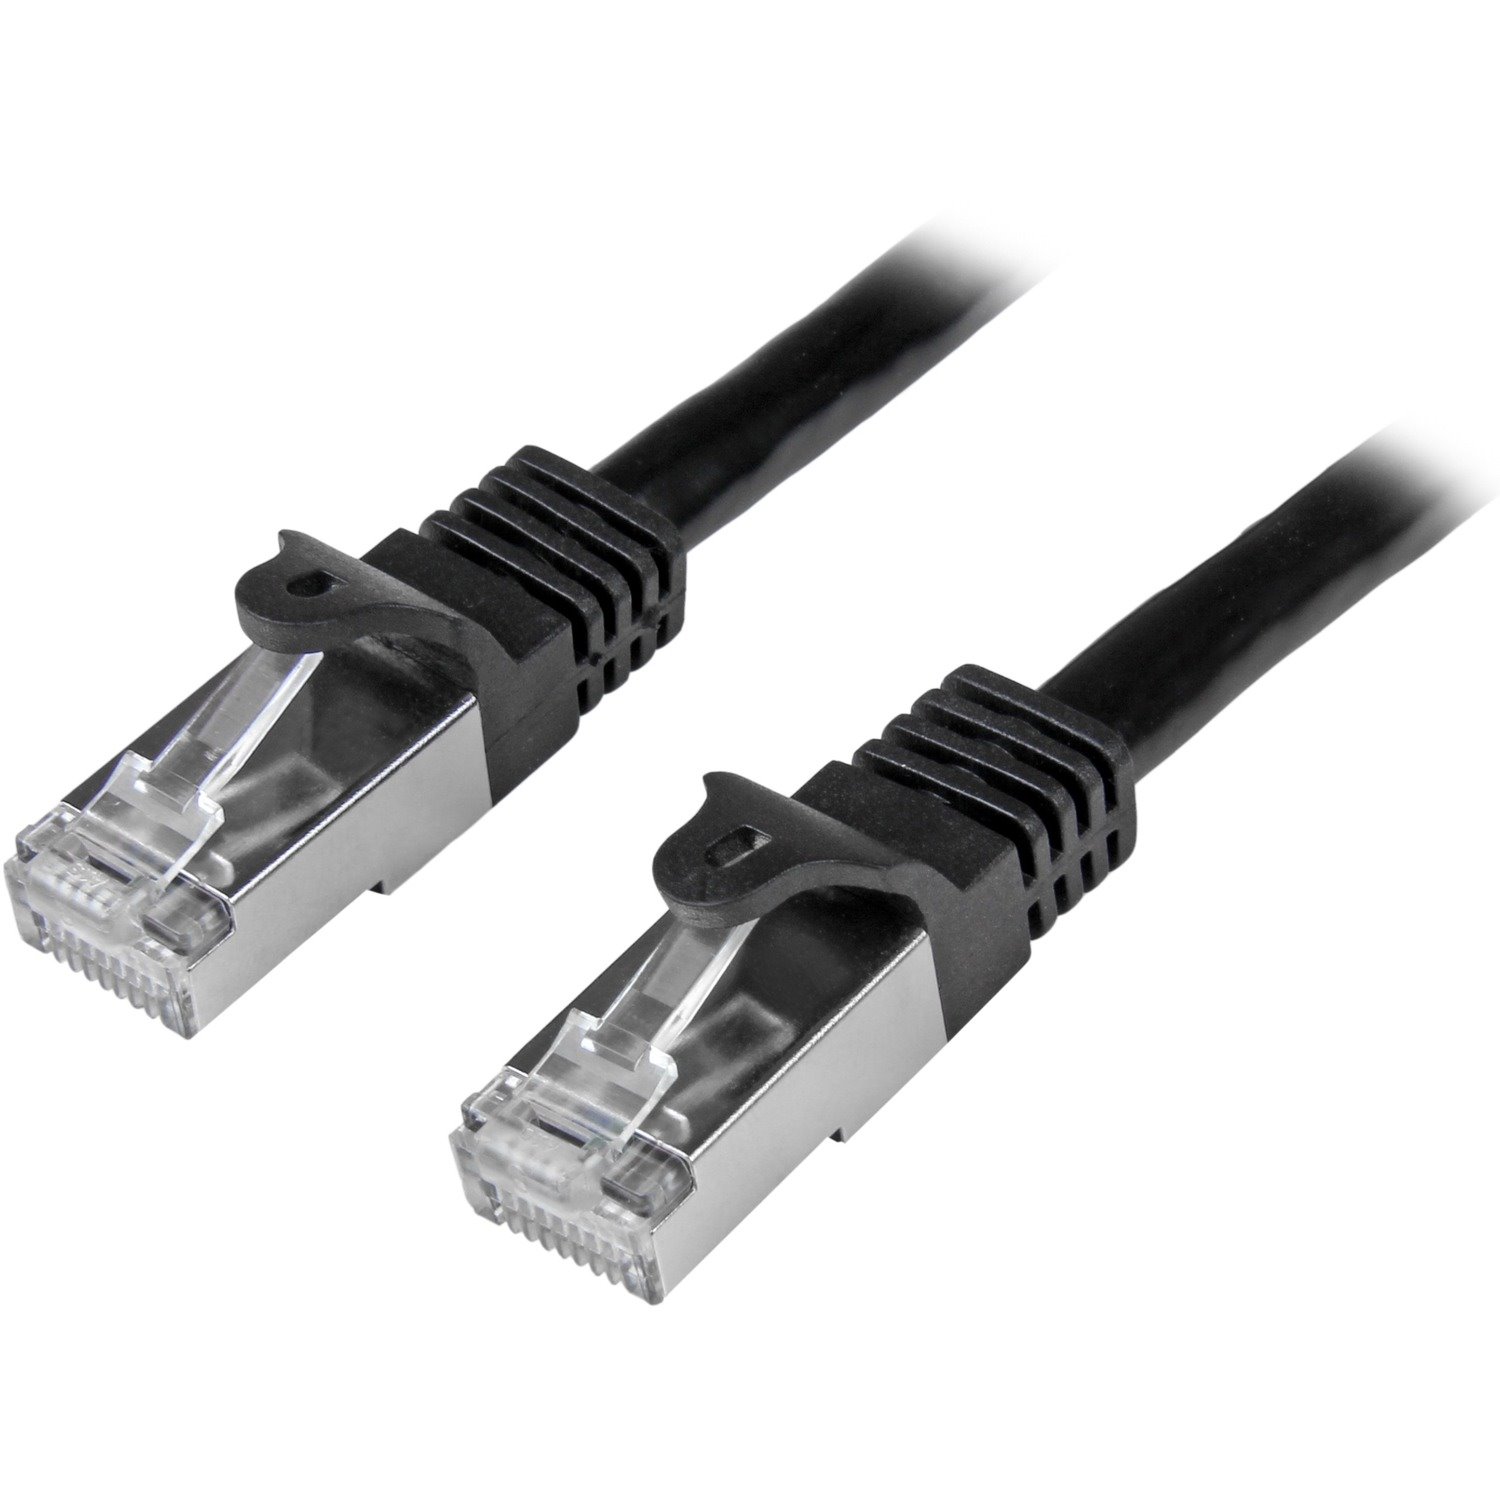 StarTech.com 2 m Category 6 Network Cable for Network Device, Switch, Hub, Patch Panel, Print Server - 1